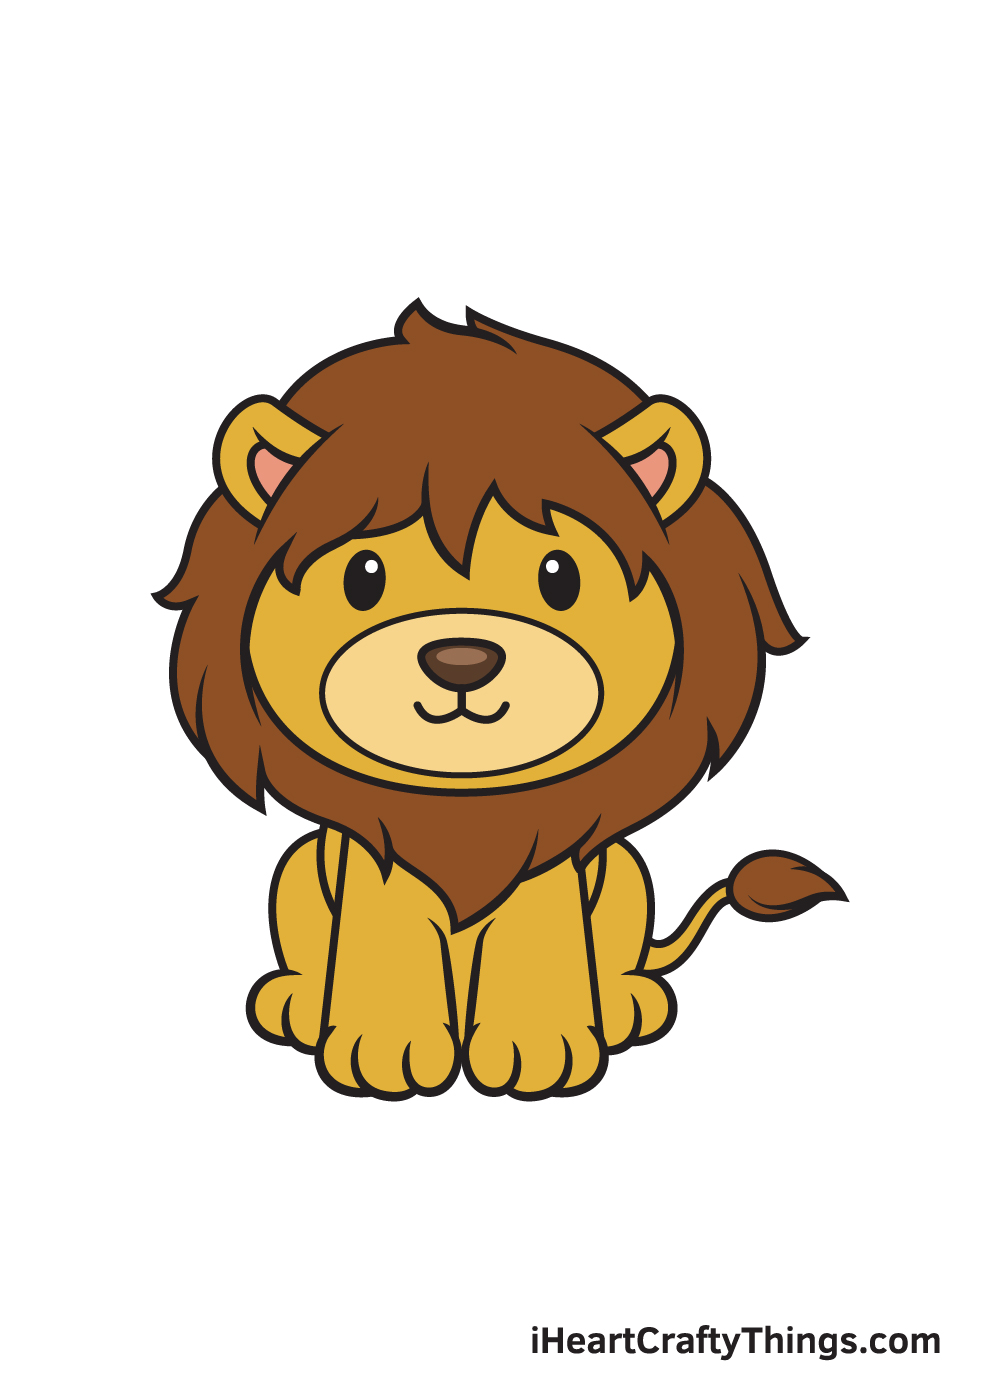 Share 135+ african lion sketch latest